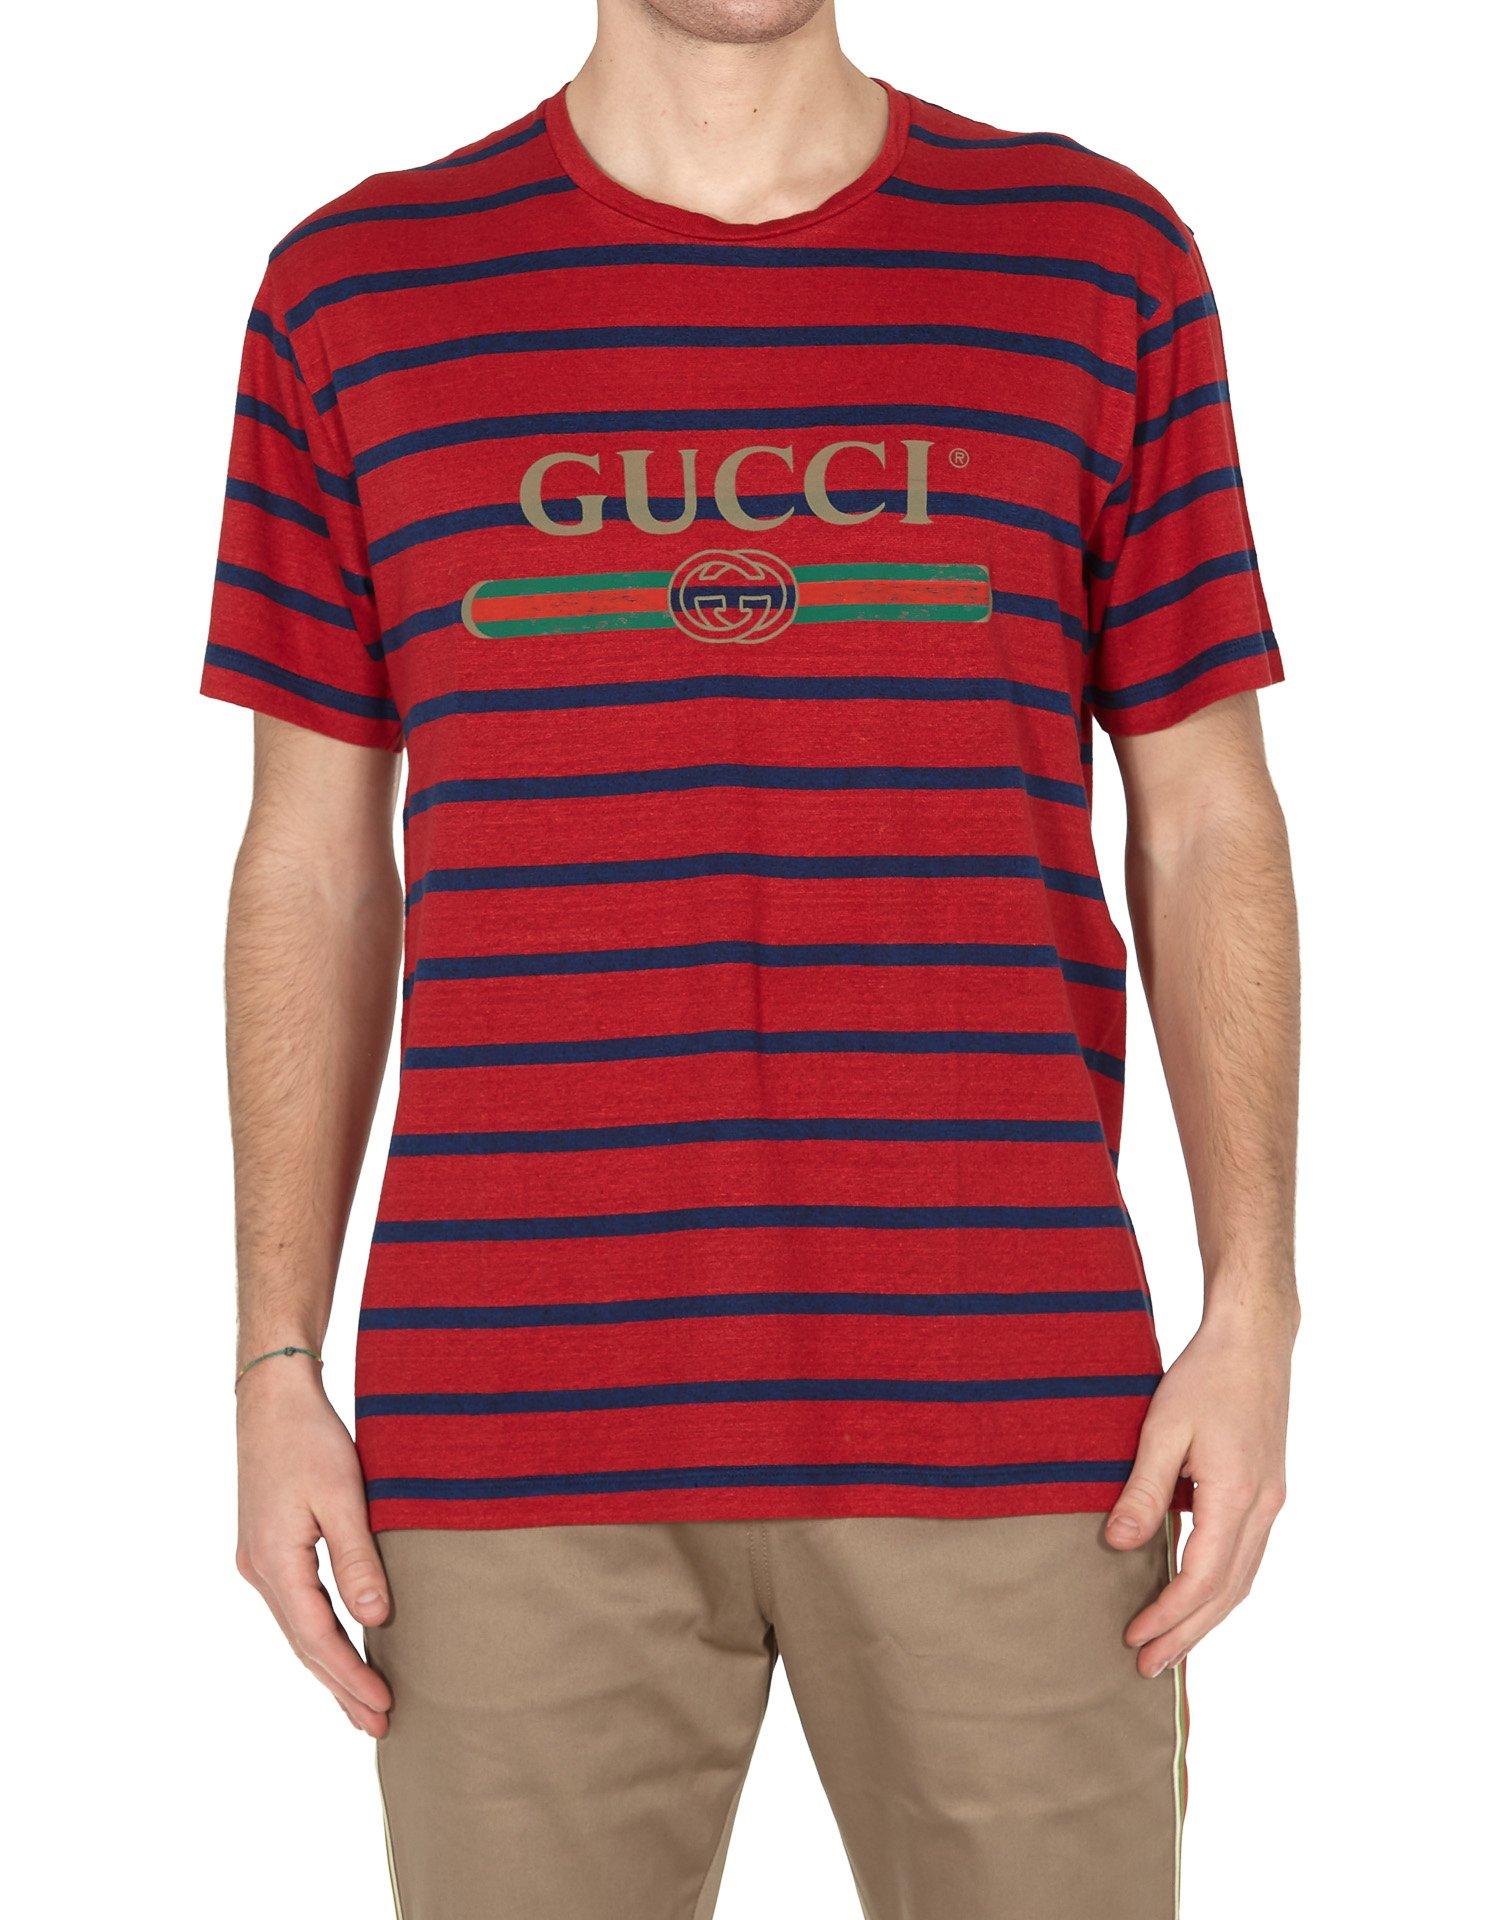 Gucci Cotton Logo Stripe T-shirt in Red for Men - Lyst